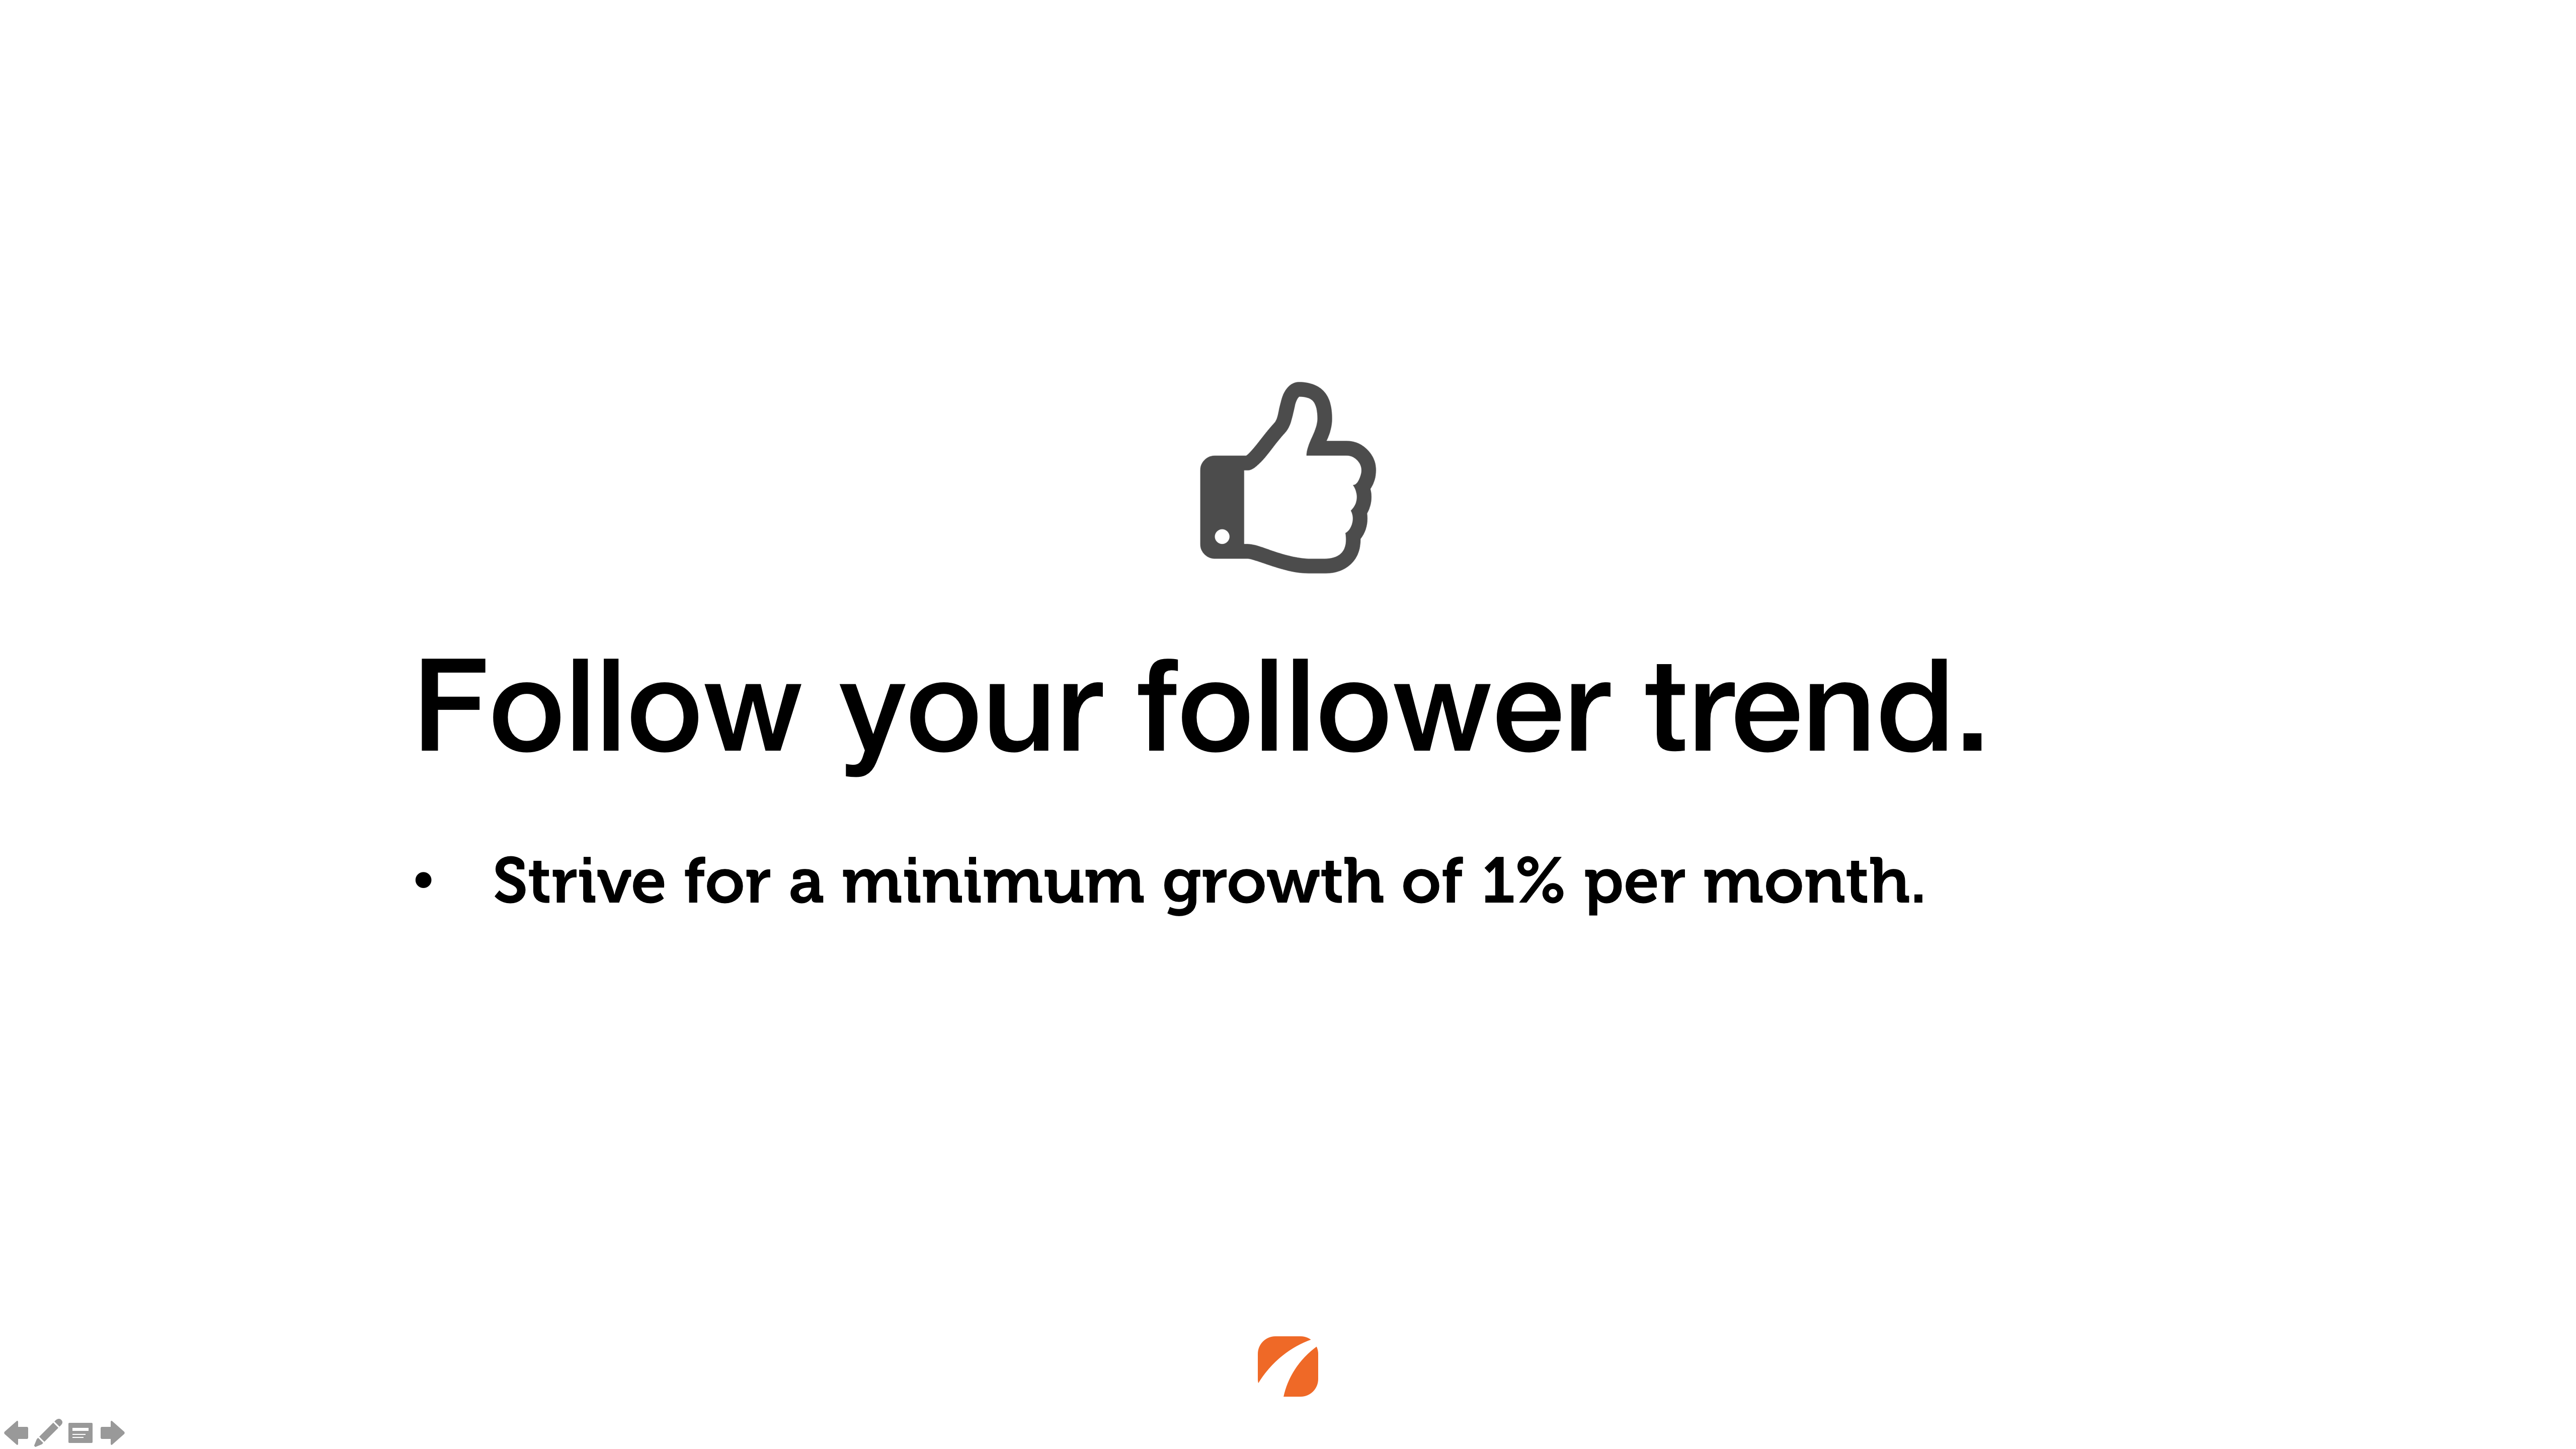 Follow your follower trend. Strive for a minimum growth of 1% per month.